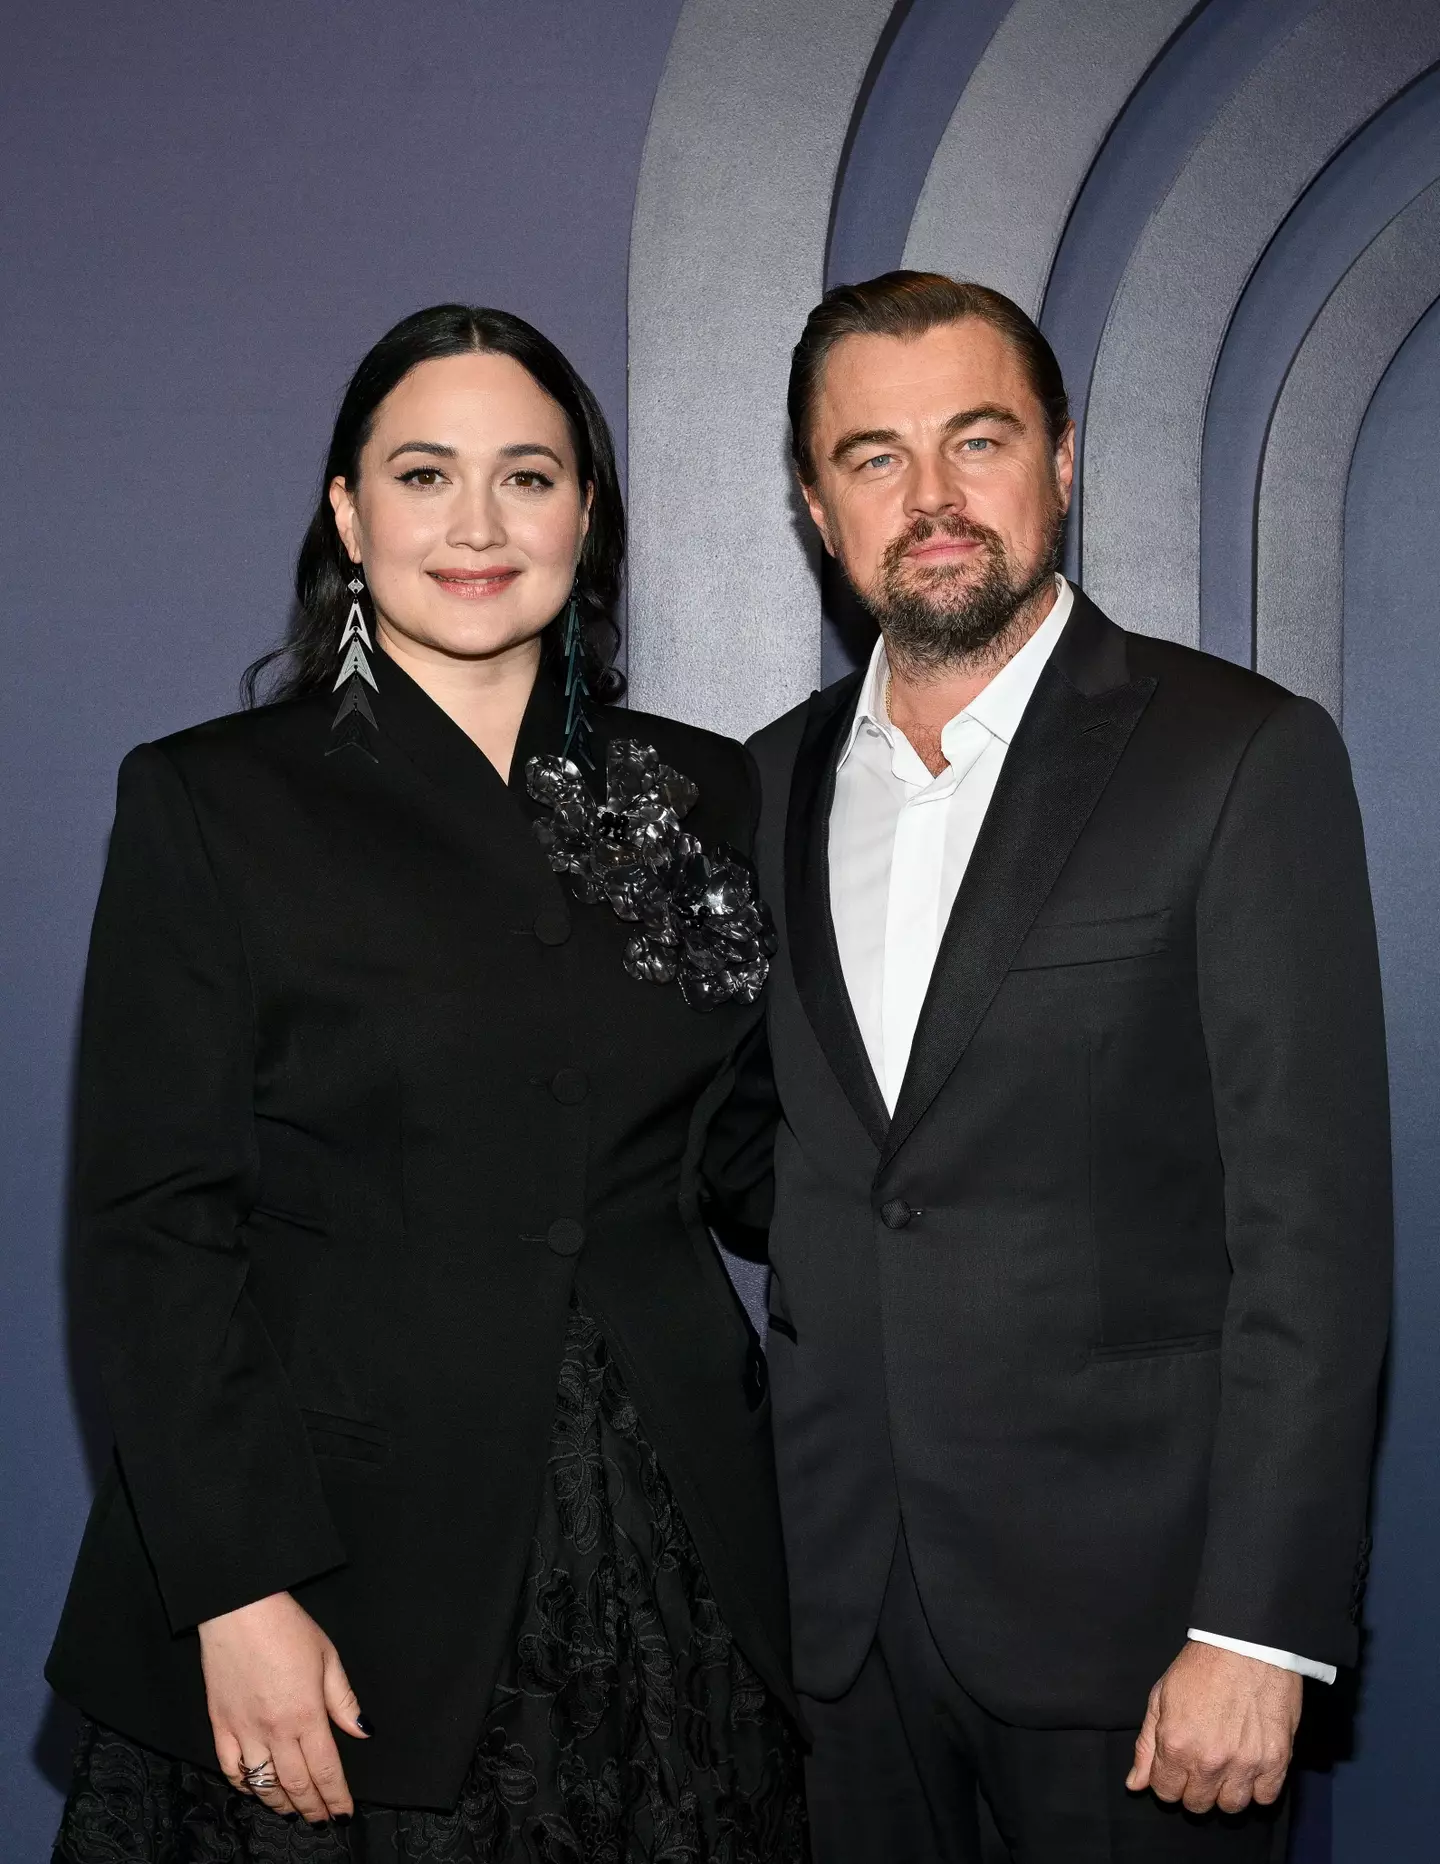 DiCaprio has publicly pledged his support to his co-star.